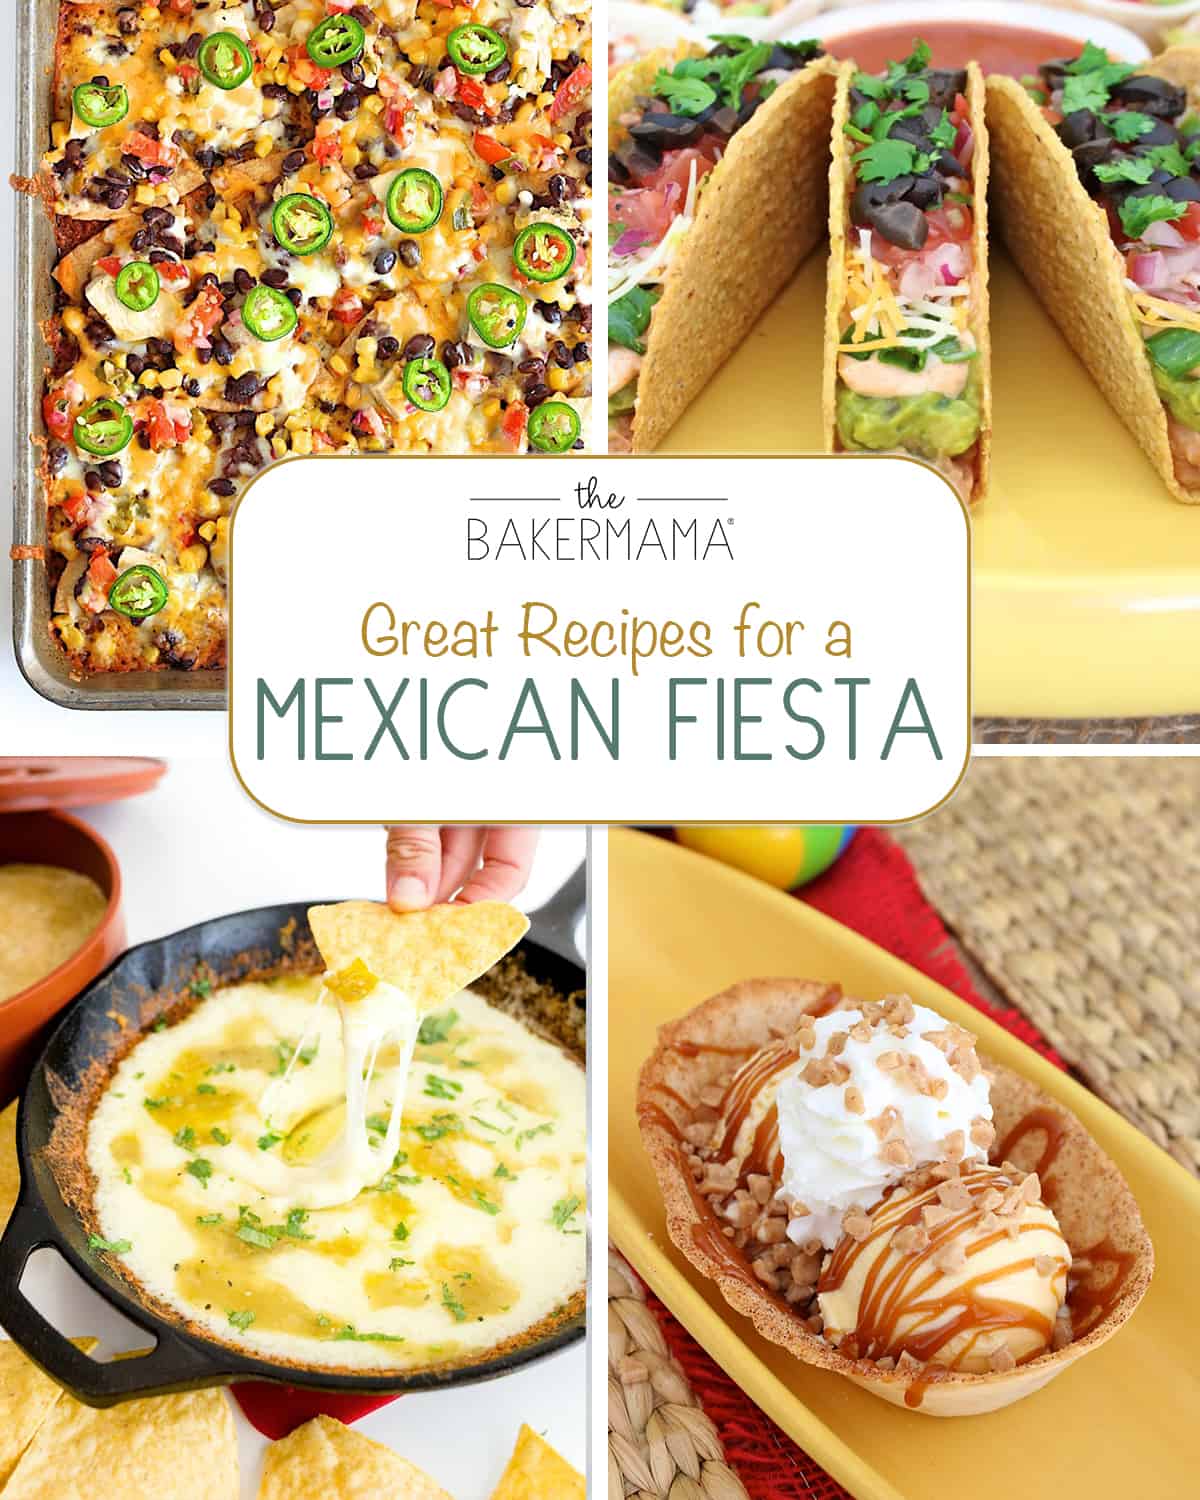 Great Recipes for a Mexican Fiesta by The BakerMama